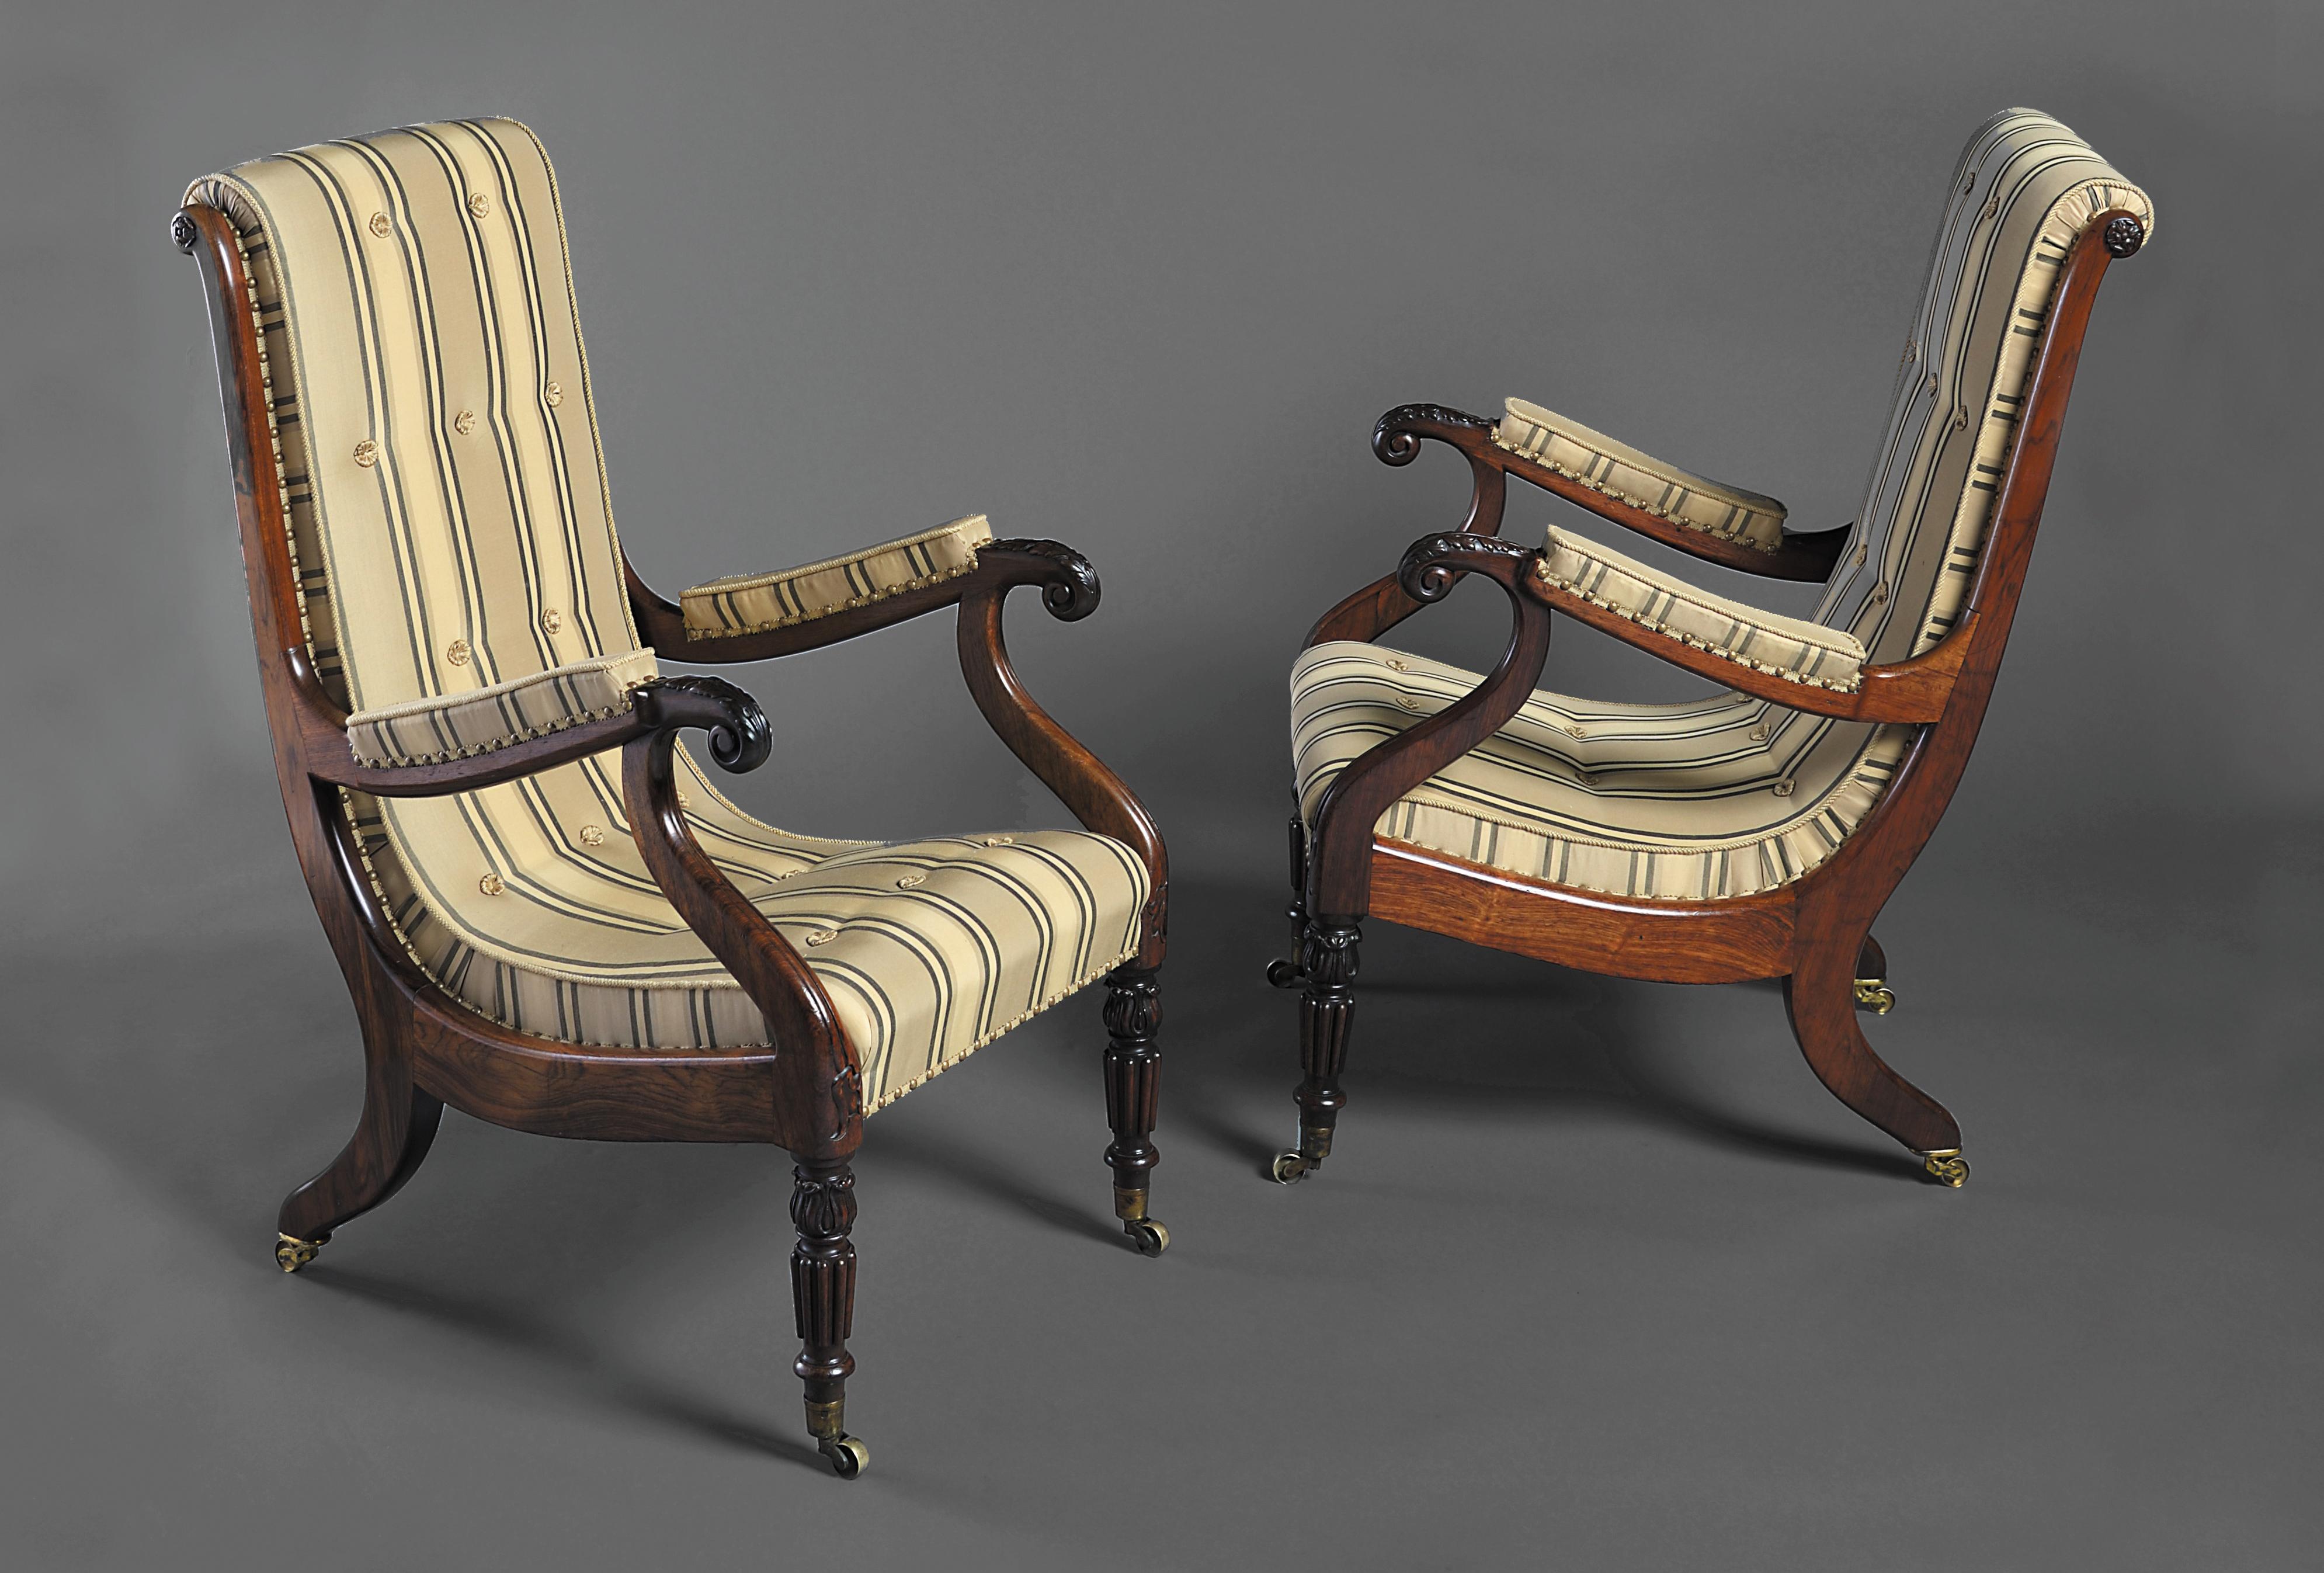 A fine pair of George IV Irish library armchairs, the well shaped backs with scroll shaped profile, acanthus carved arms, resting on turned fluted legs, with lotus leaf carving and brass cup castors.

Attributed to Williams & Gibton 
